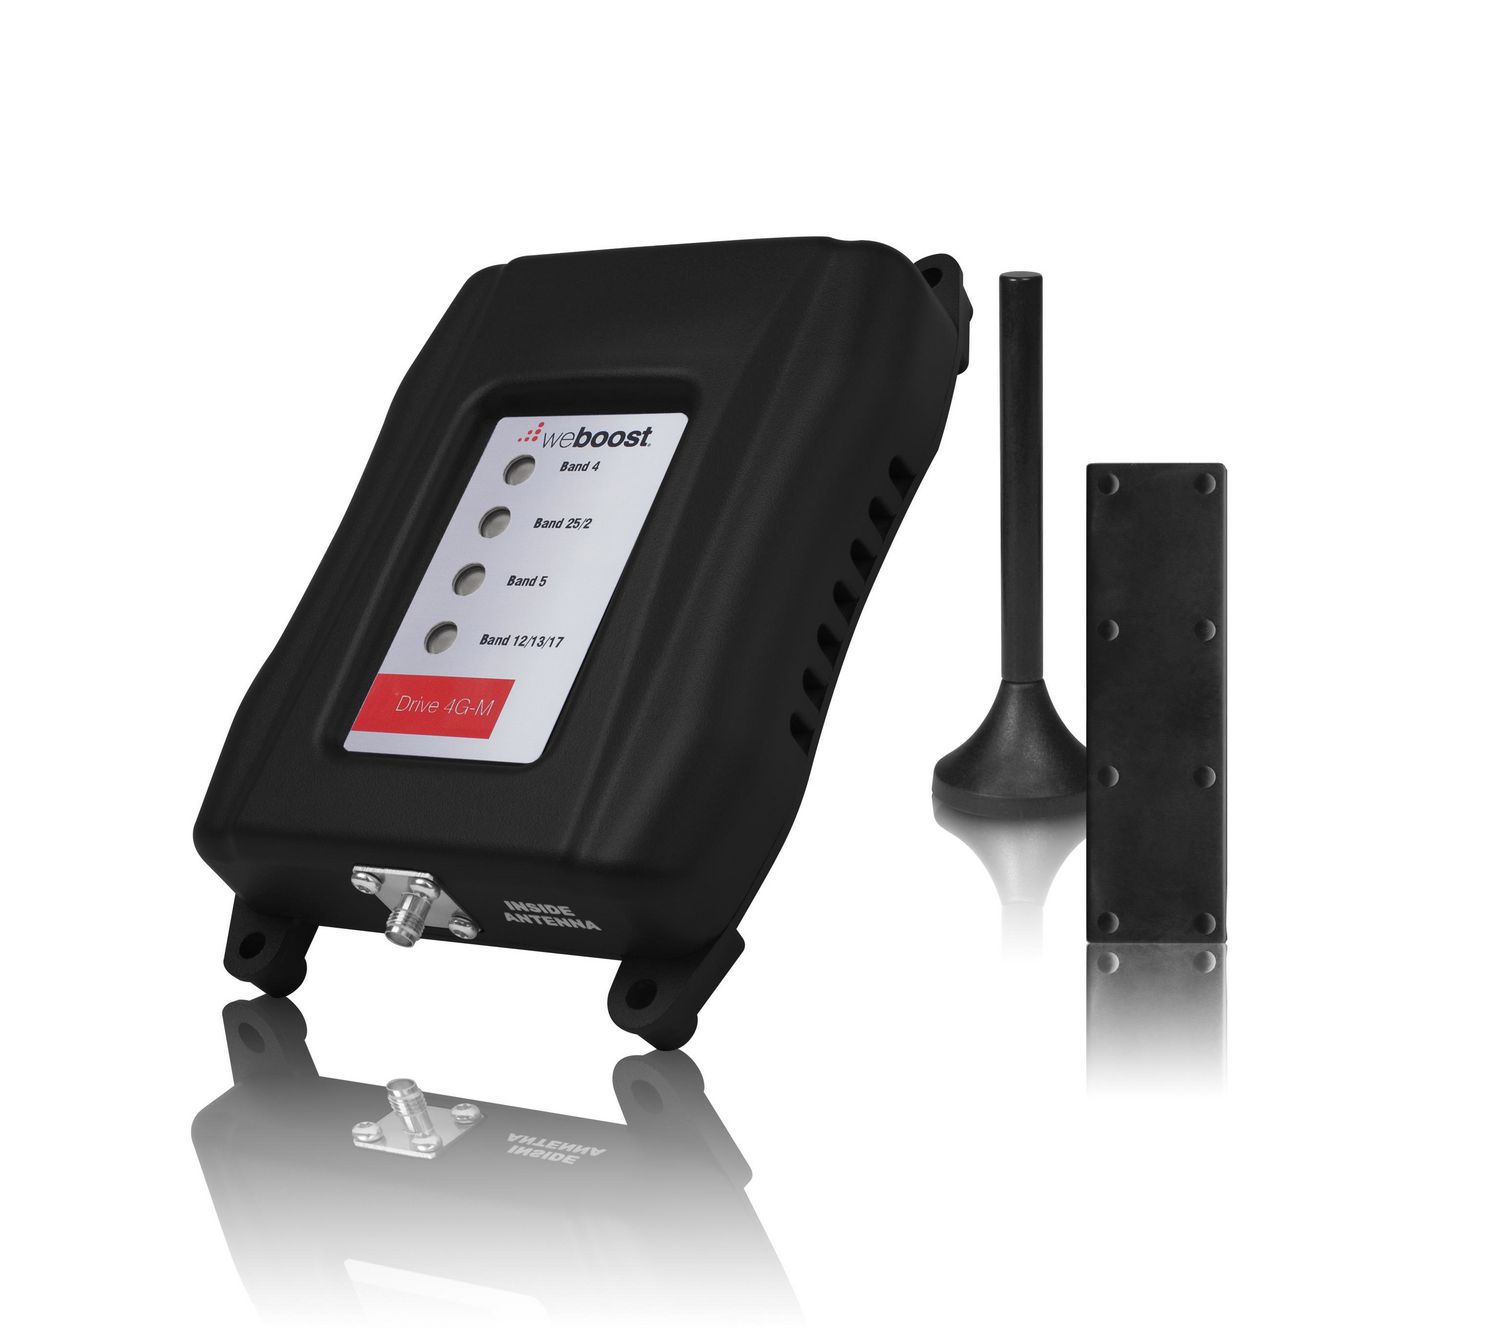 we boost cell phone signal booster